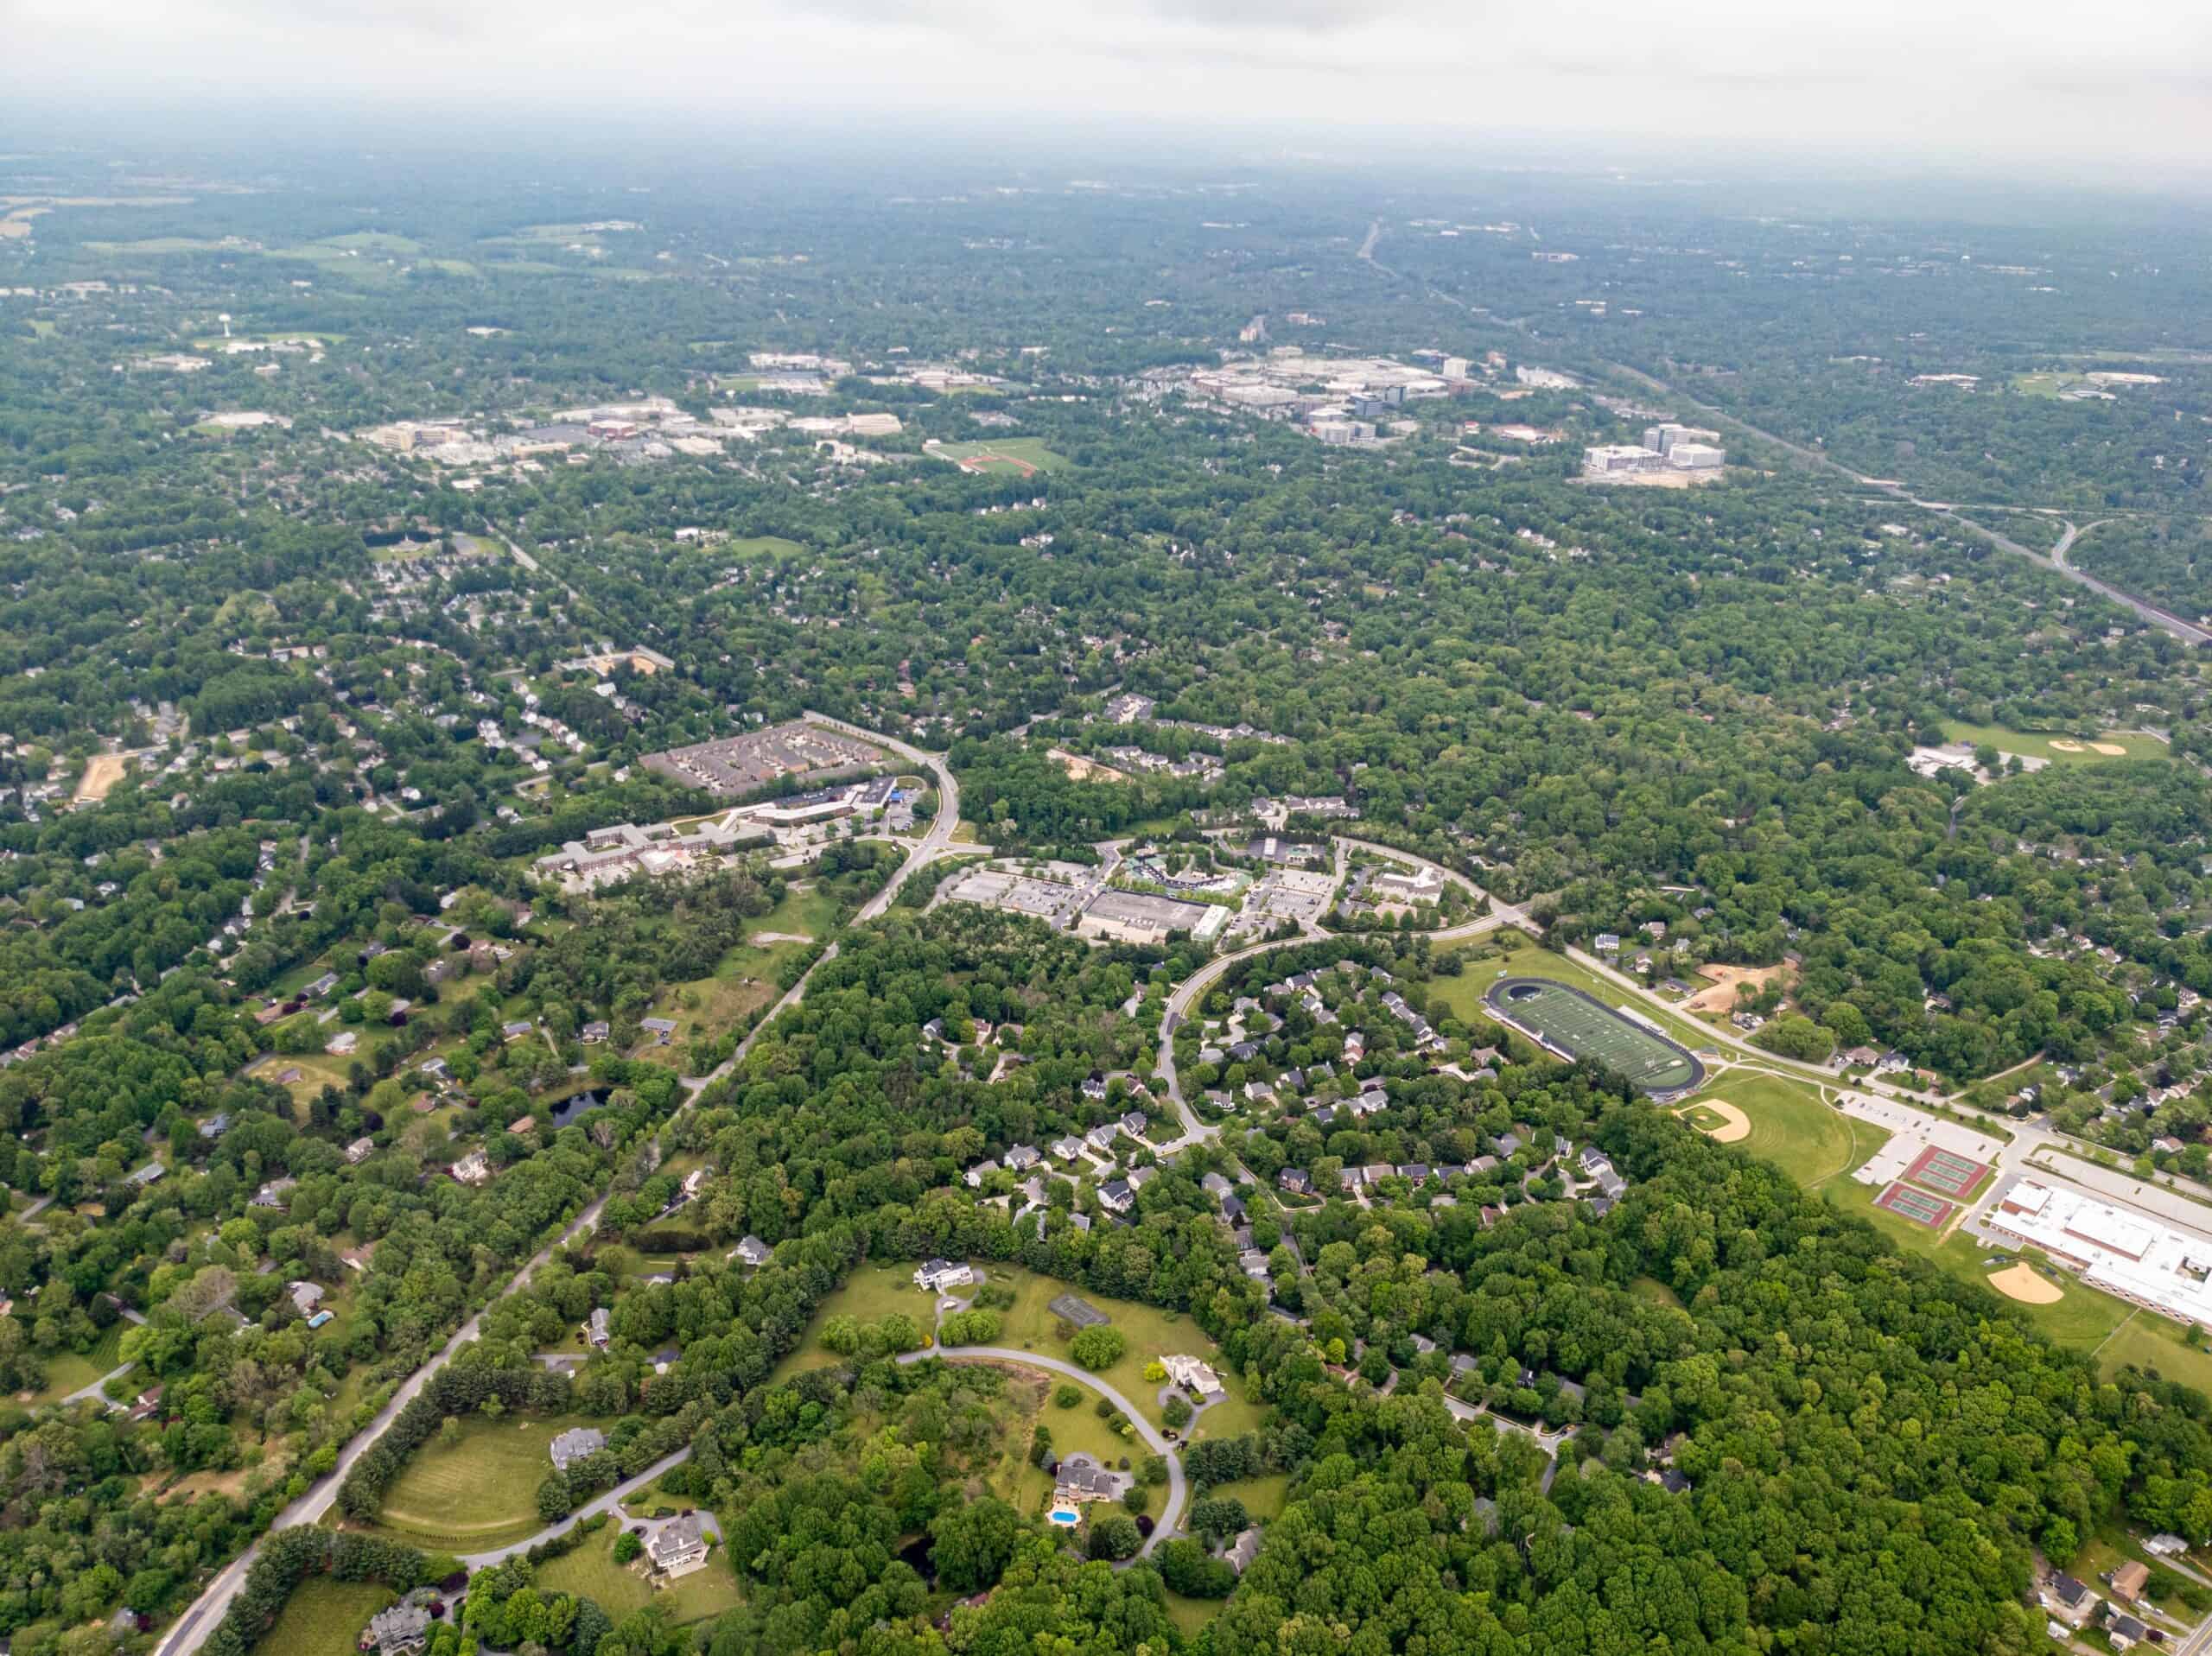 Columbia, Maryland | Aerial view of Columbia, Maryland